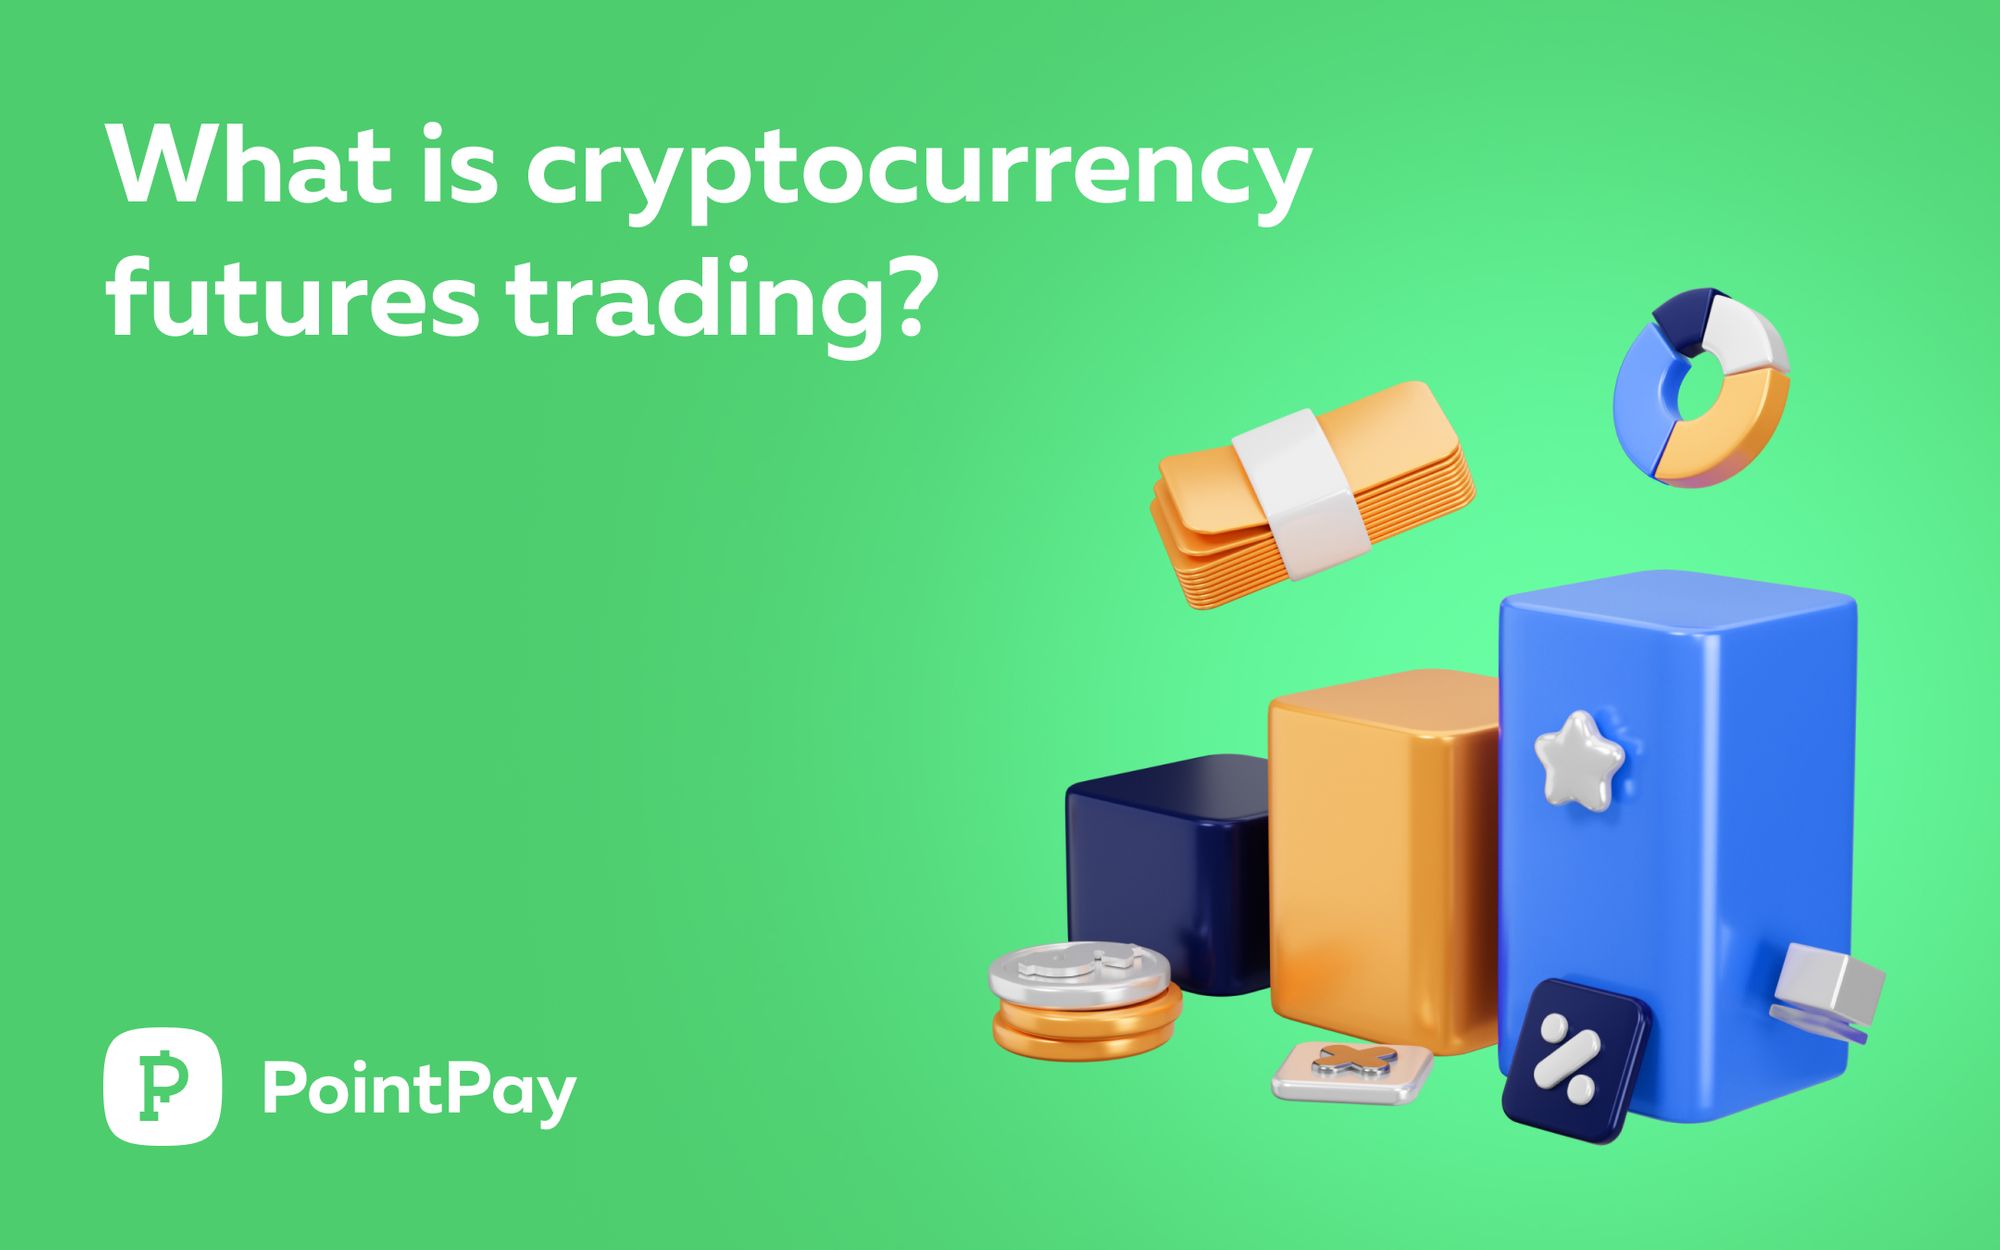 What is futures trading in crypto?